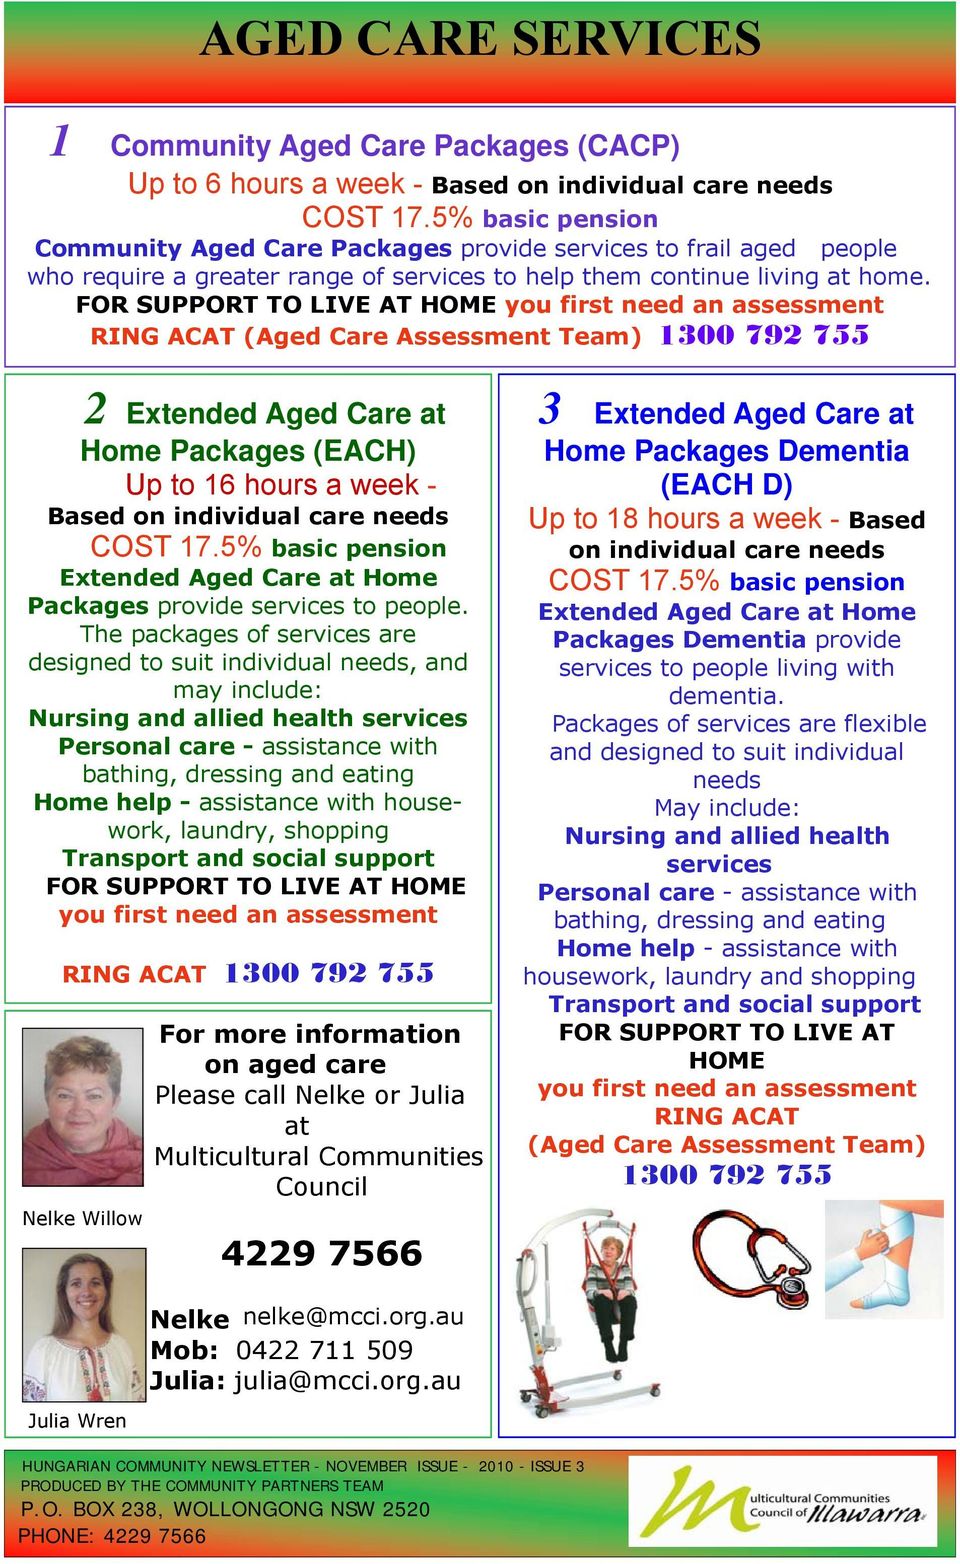 FOR SUPPORT TO LIVE AT HOME you first need an assessment RING ACAT (Aged Care Assessment Team) 1300 792 755 2 Extended Aged Care at Home Packages (EACH) Up to 16 hours a week - Based on individual